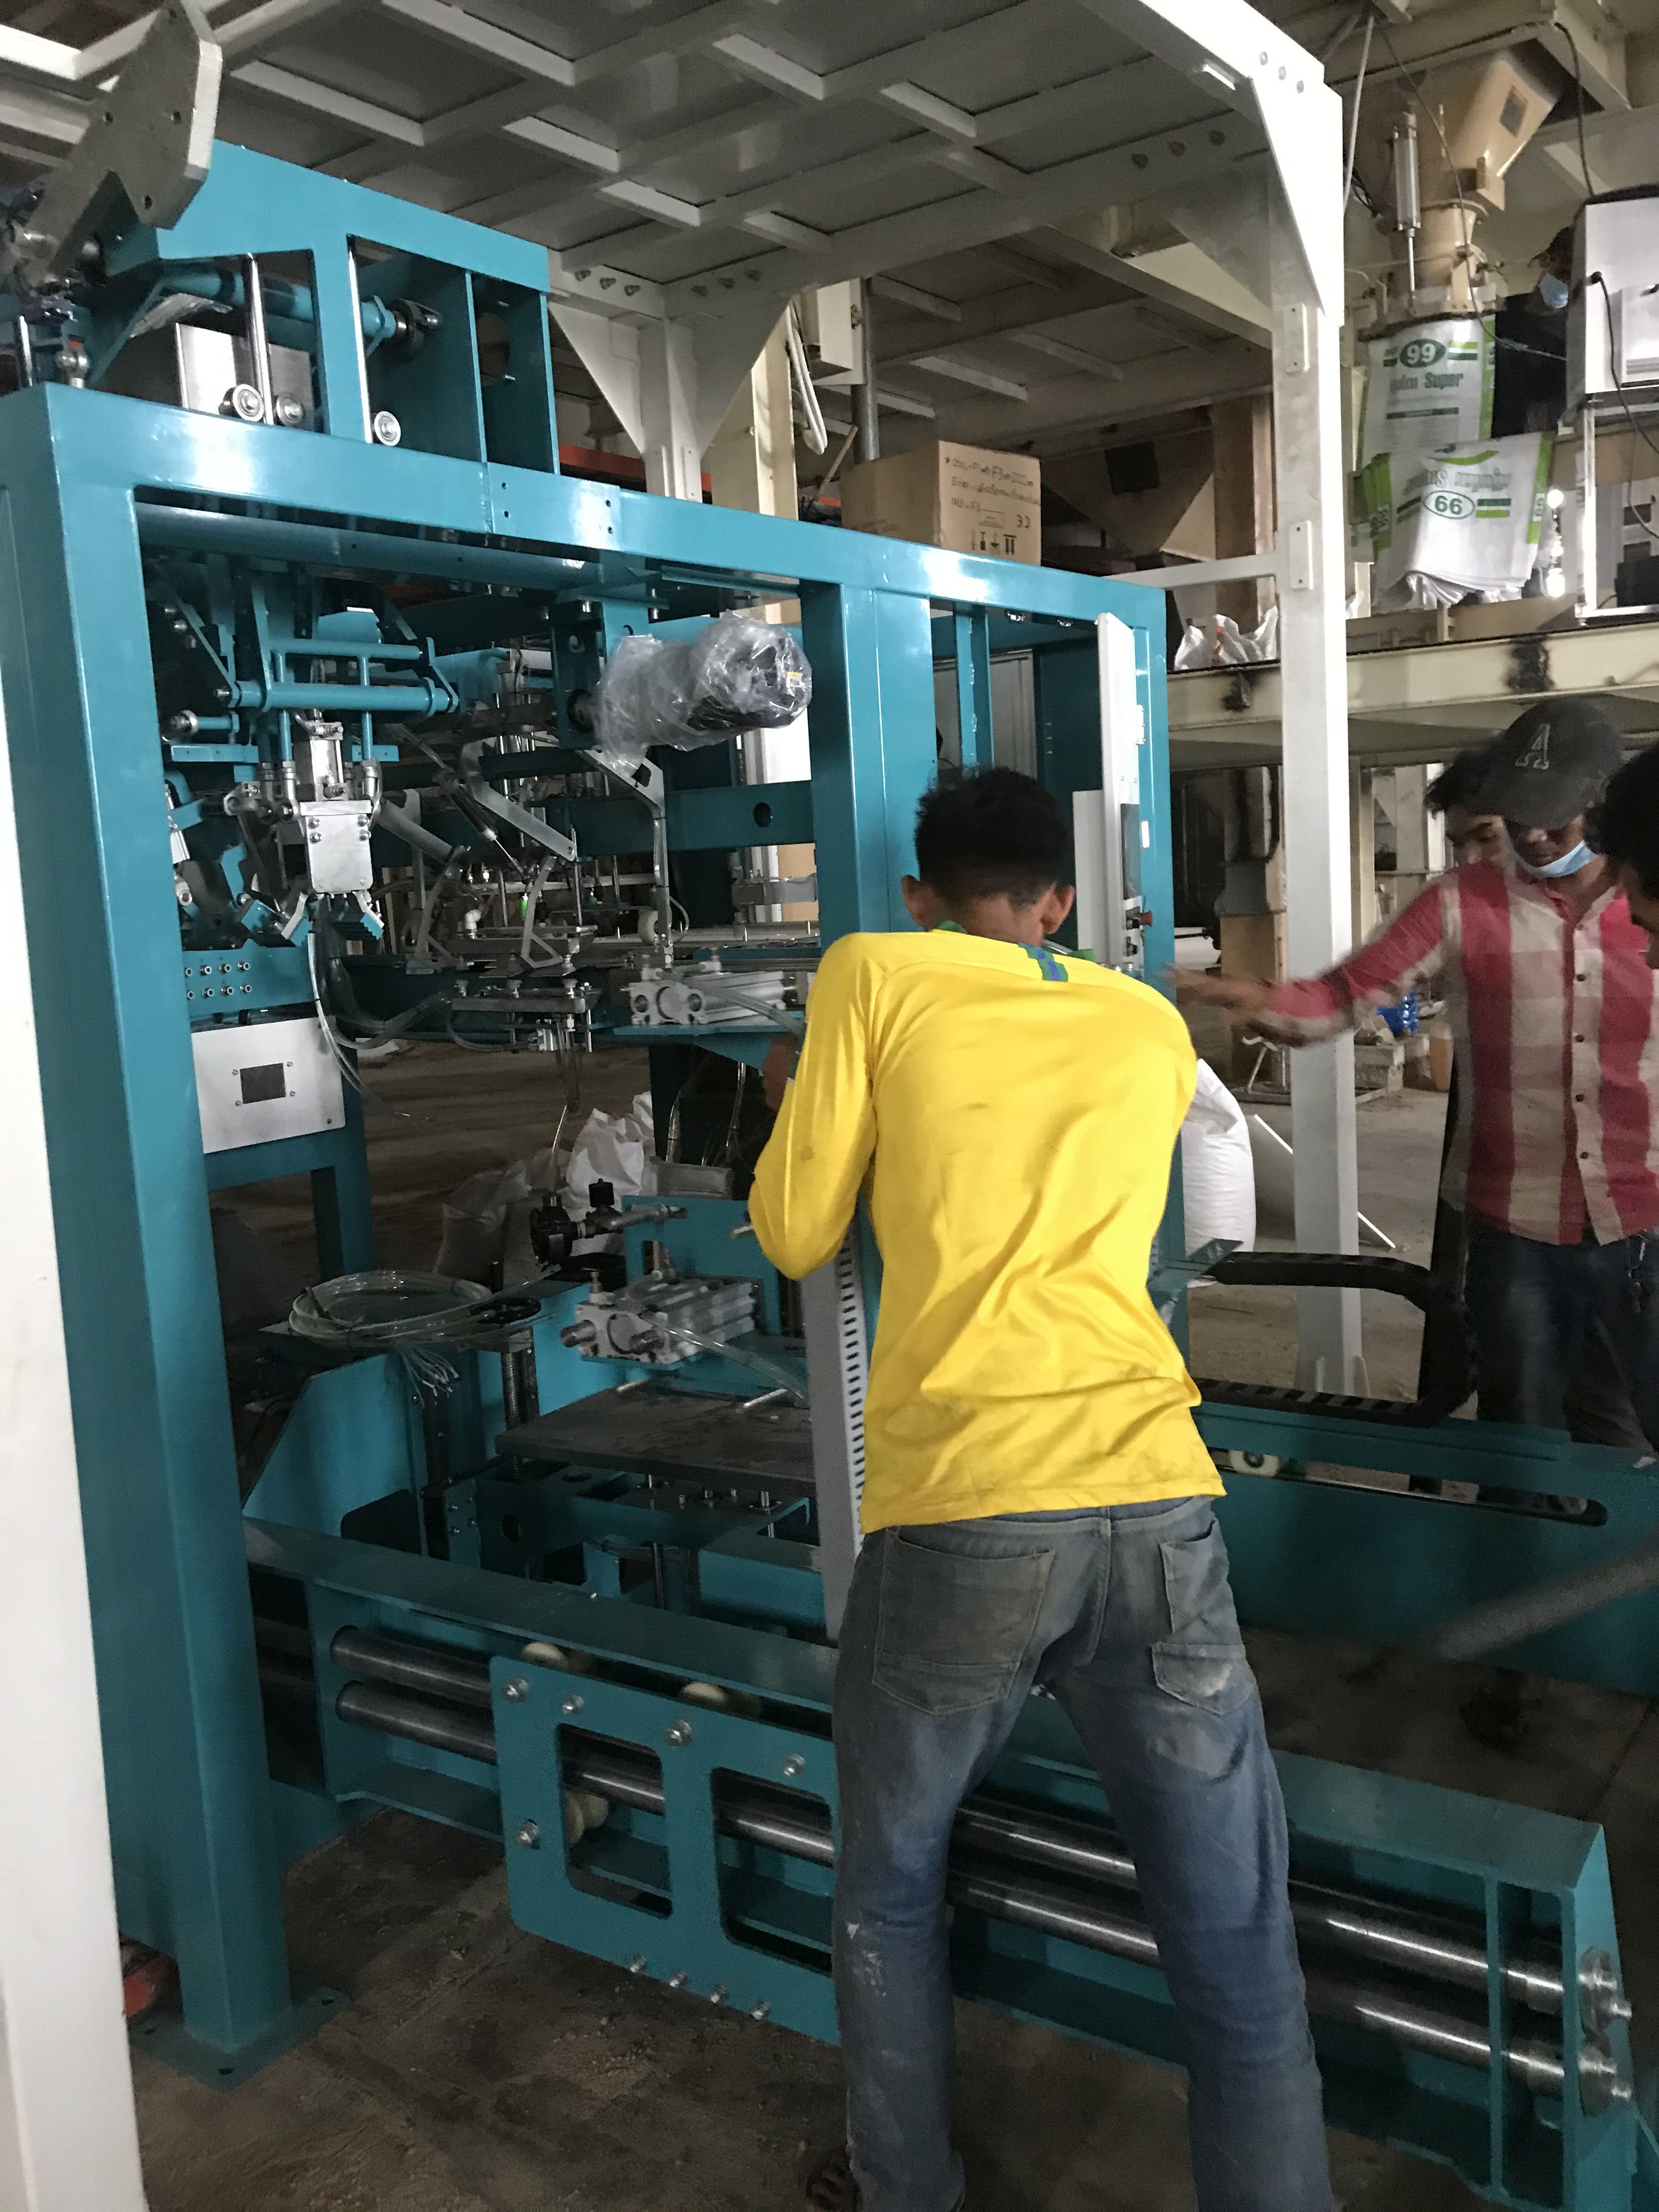 Corn packing machine Wheat Corn bagging machine Grains bagging machine Whole Grains packing machine fully Automatic Packing Palletizing Line, Fully Automatic Packing Line, Fully Automatic Bagging Line